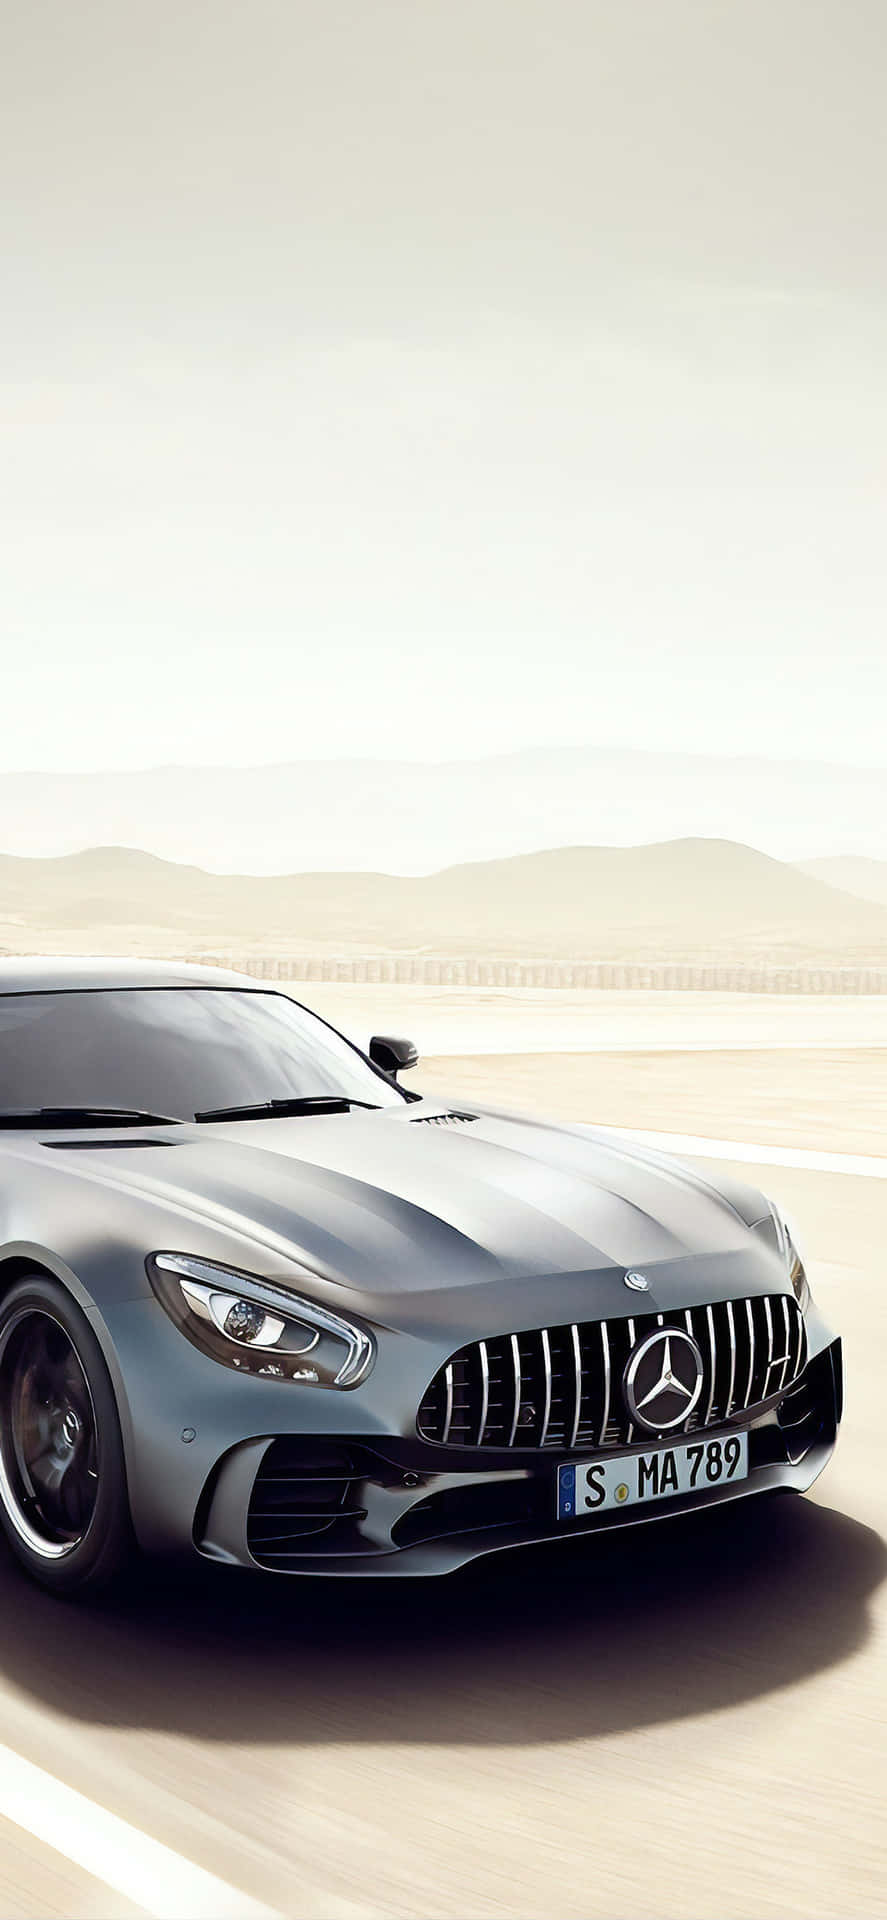 Silver Iphone Xs Mercedes Amg Background In Desert